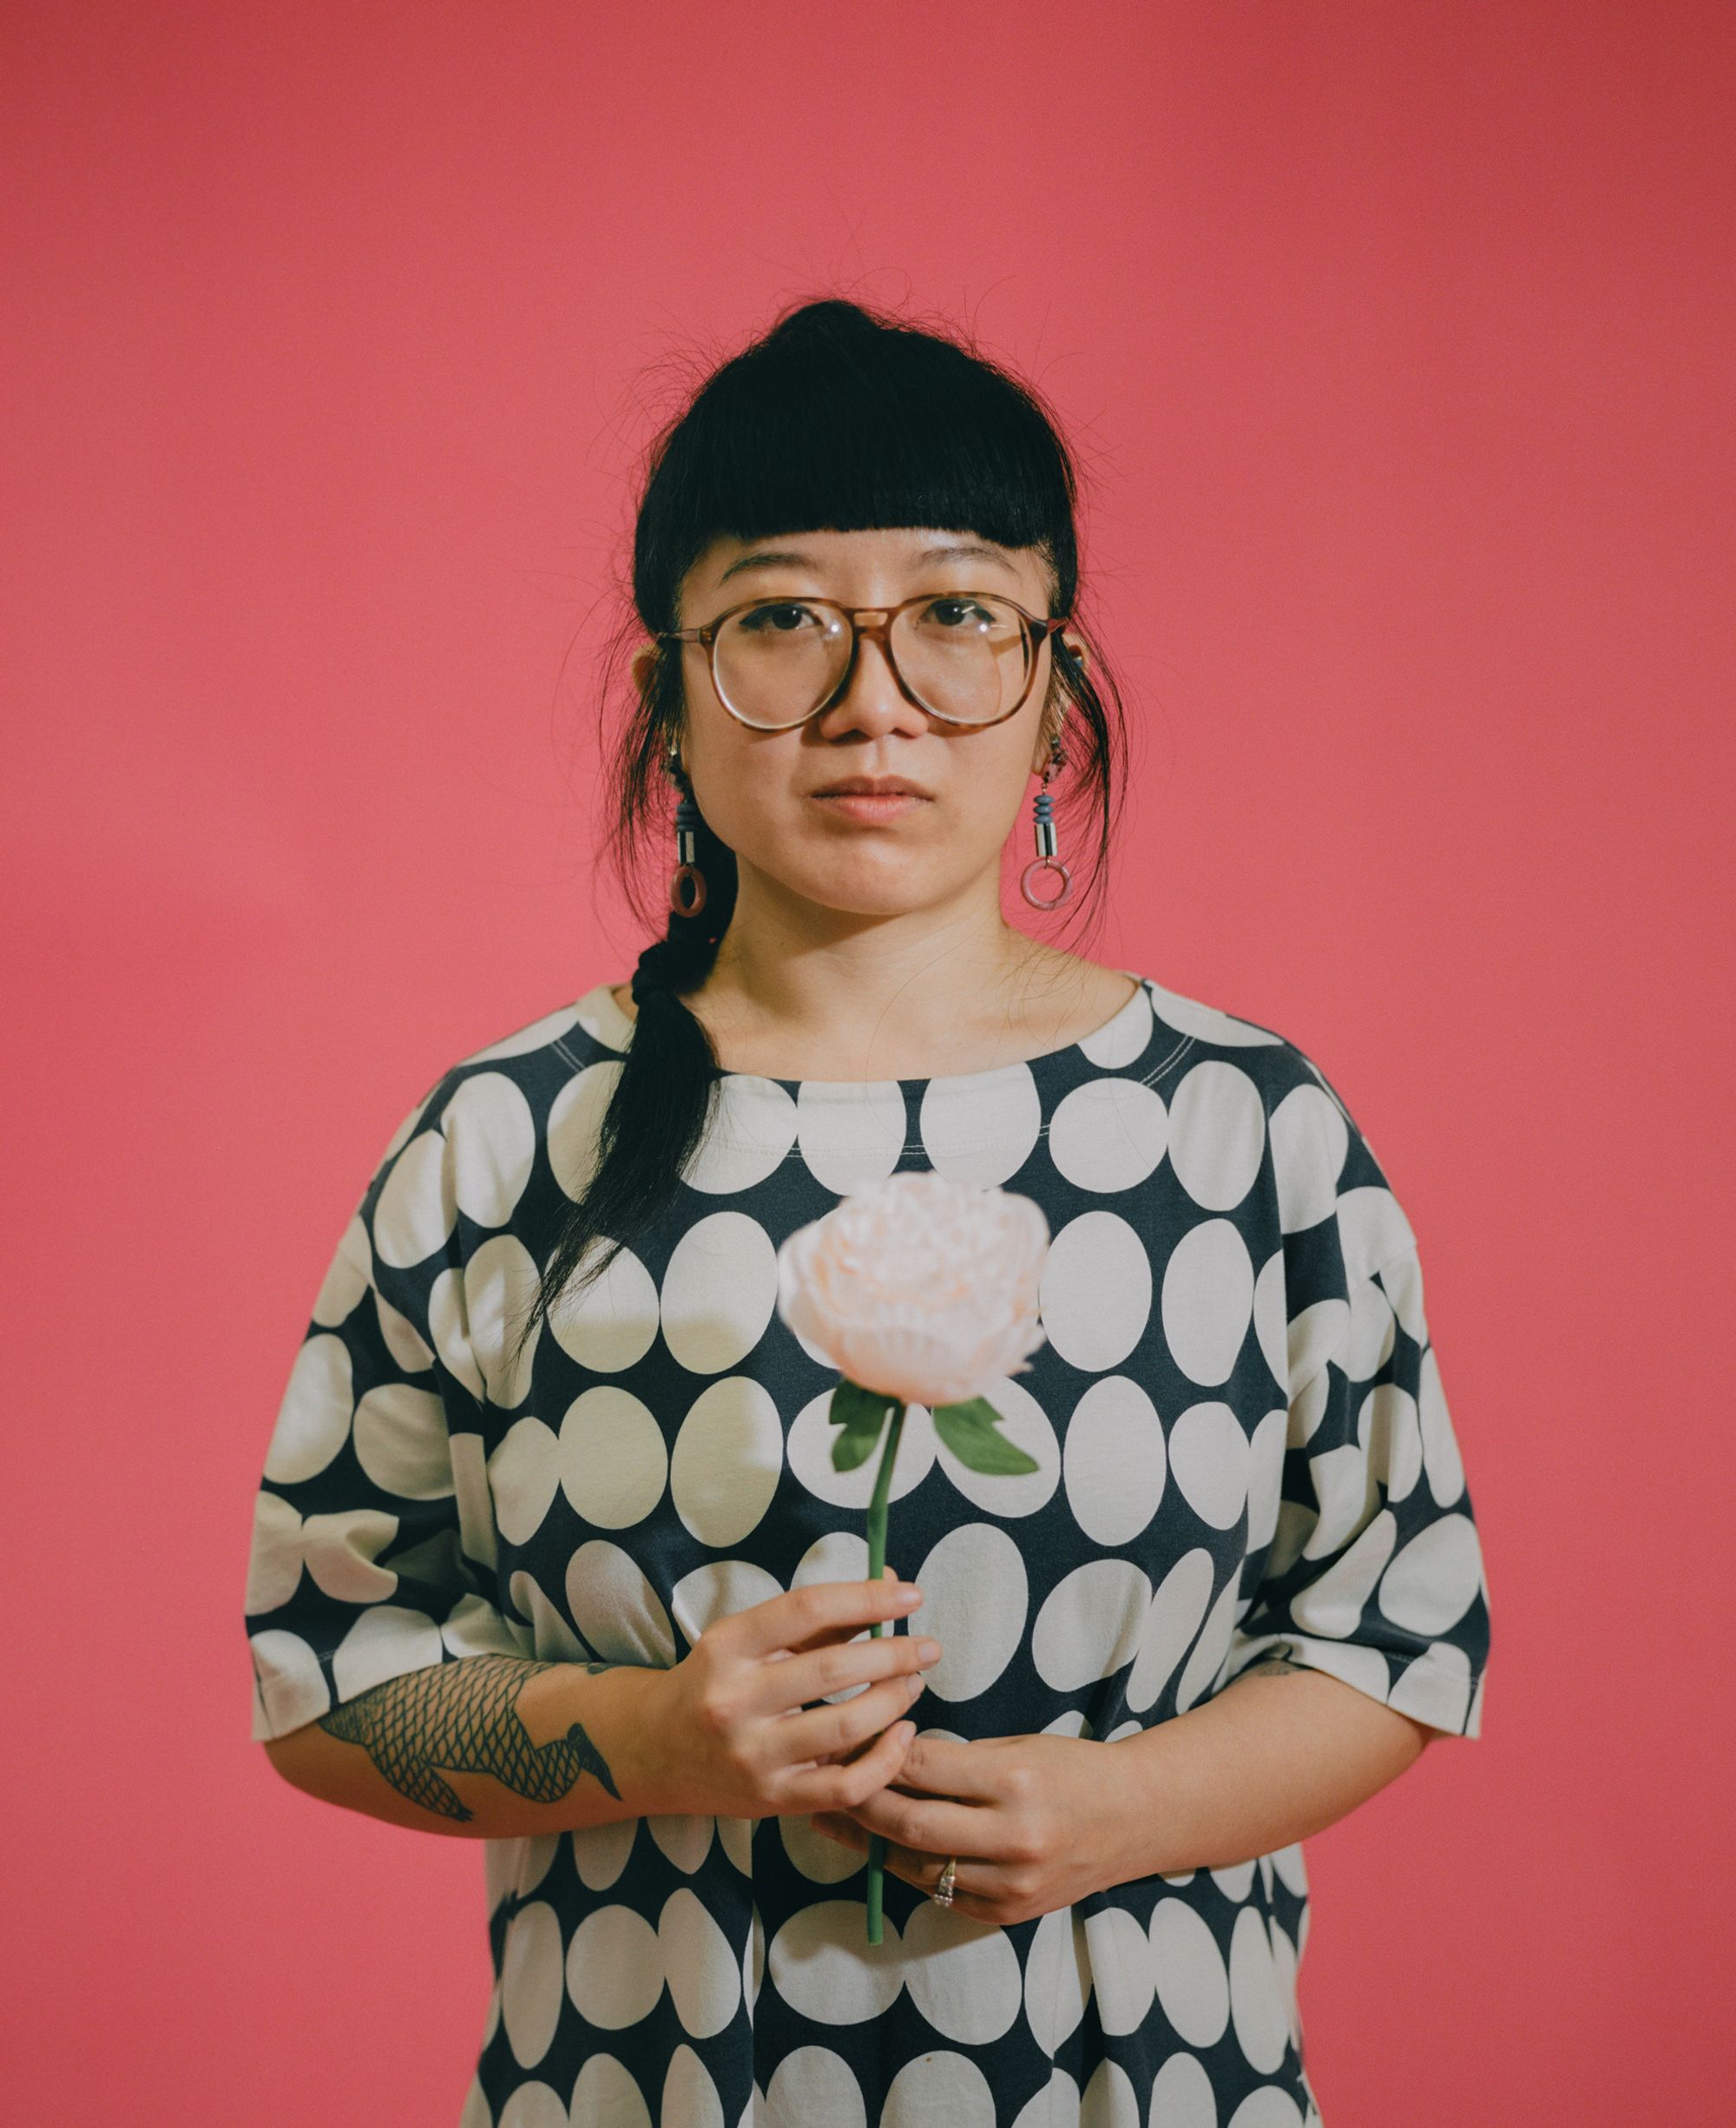 Photographic portrait of painter and illustrator Kristen Liu-Wong shot against a pink backdrop, holding a peony stem.